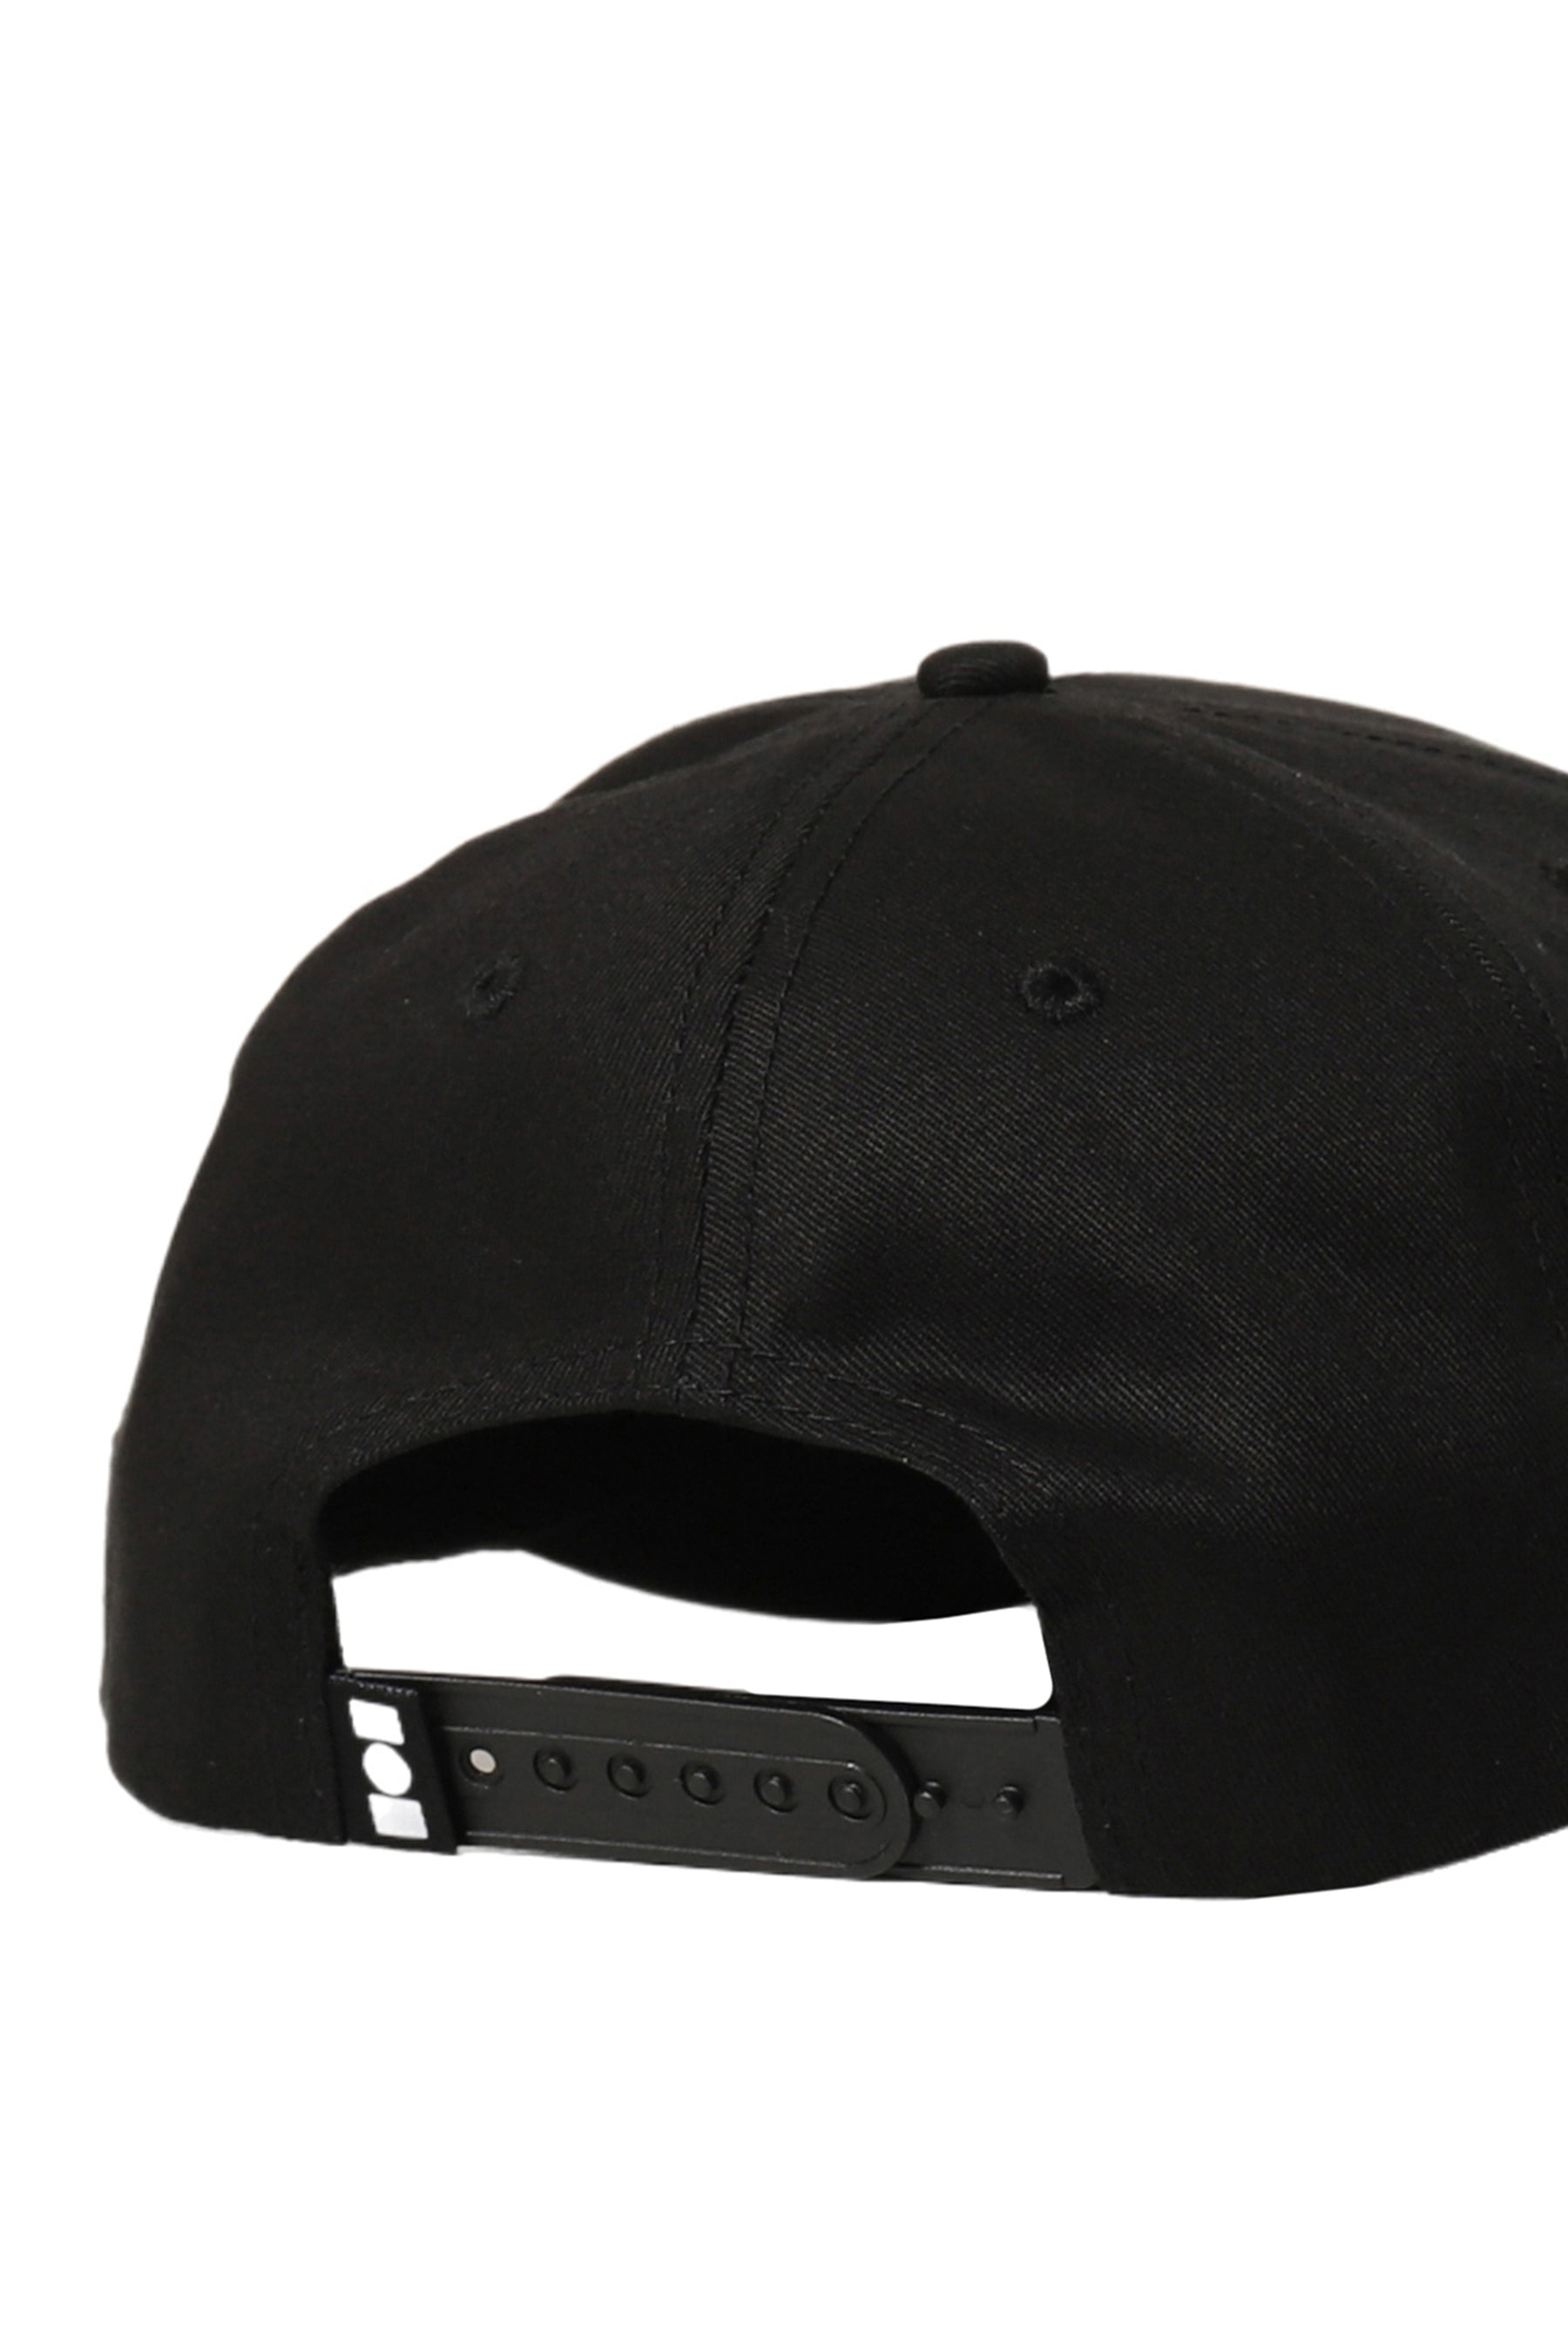 VINTAGE MIRACLE ACADEMY HAT / BLK